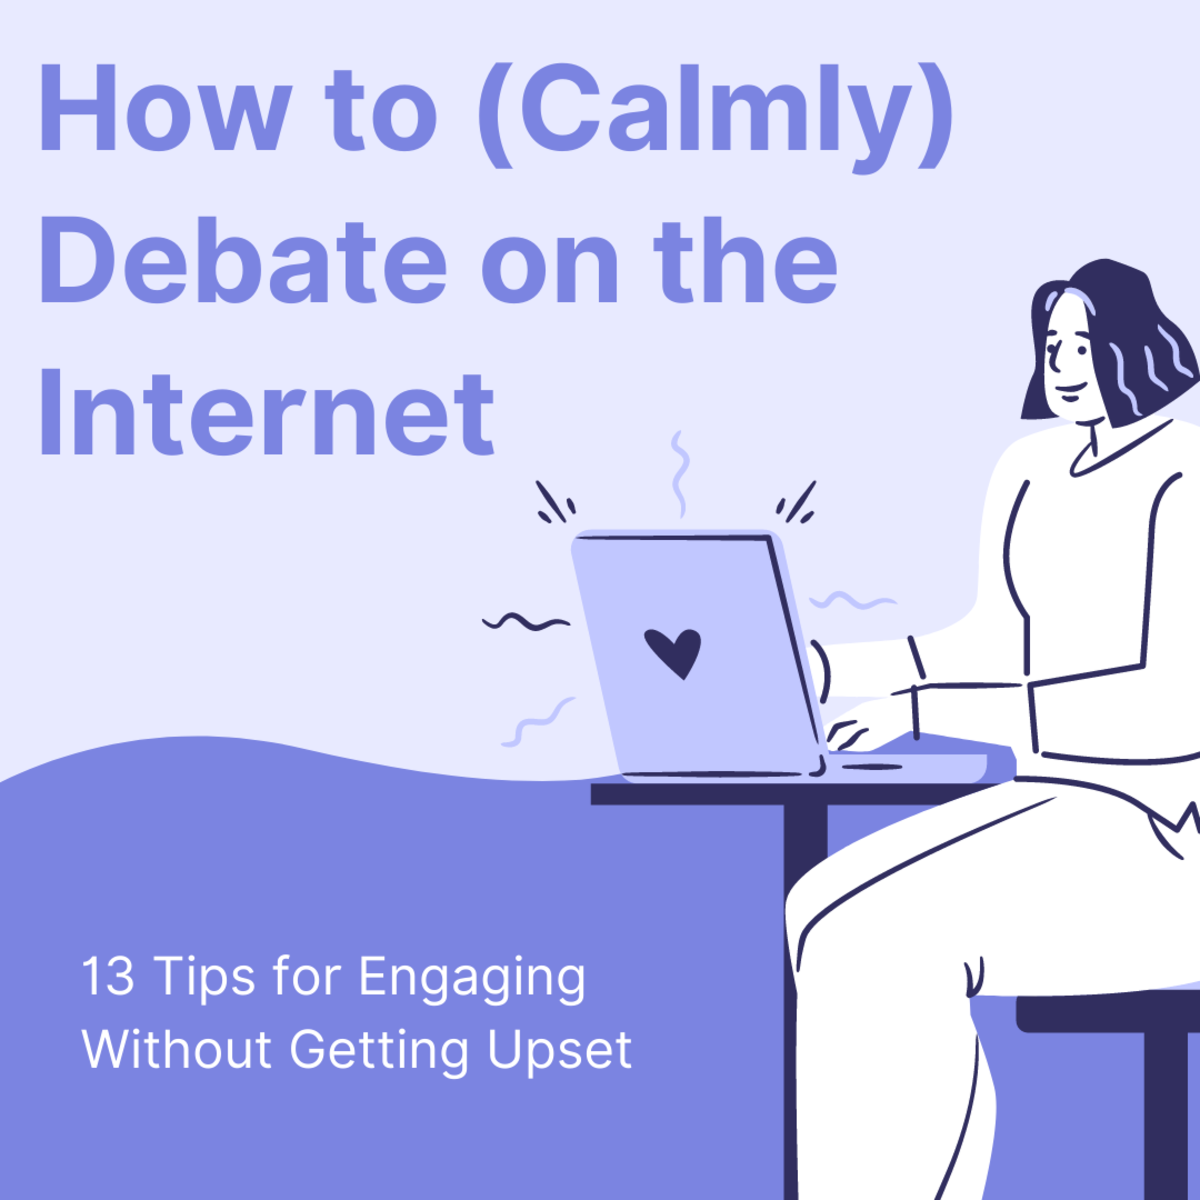 How to Have Productive Debates on the Internet Without Getting Upset